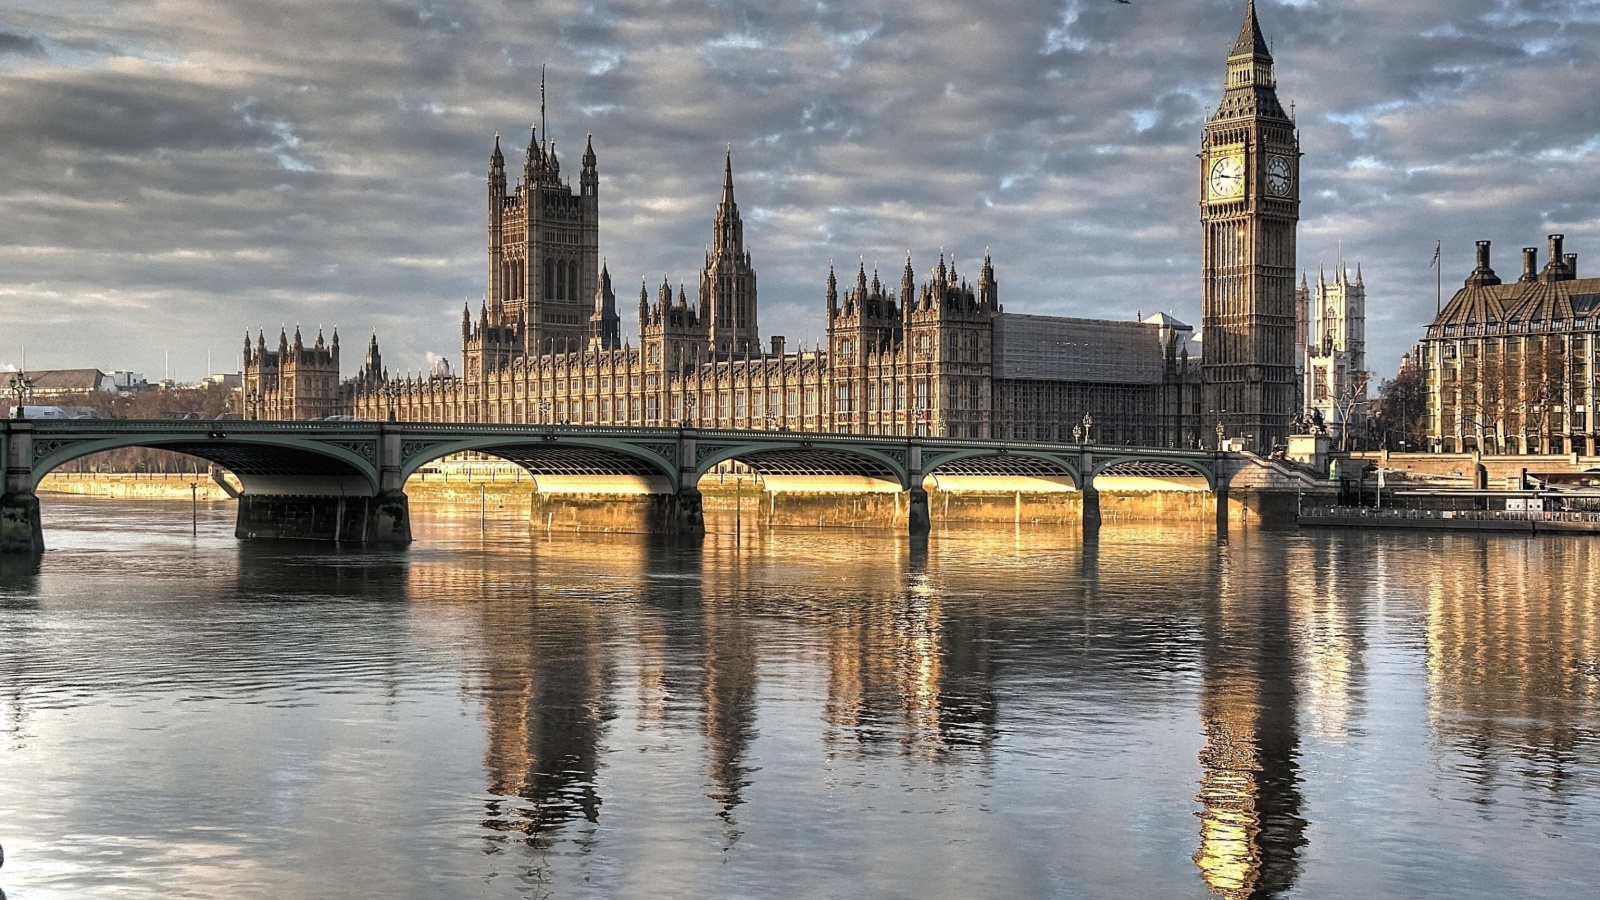 Palace of Westminster in London wallpaper 1600x900